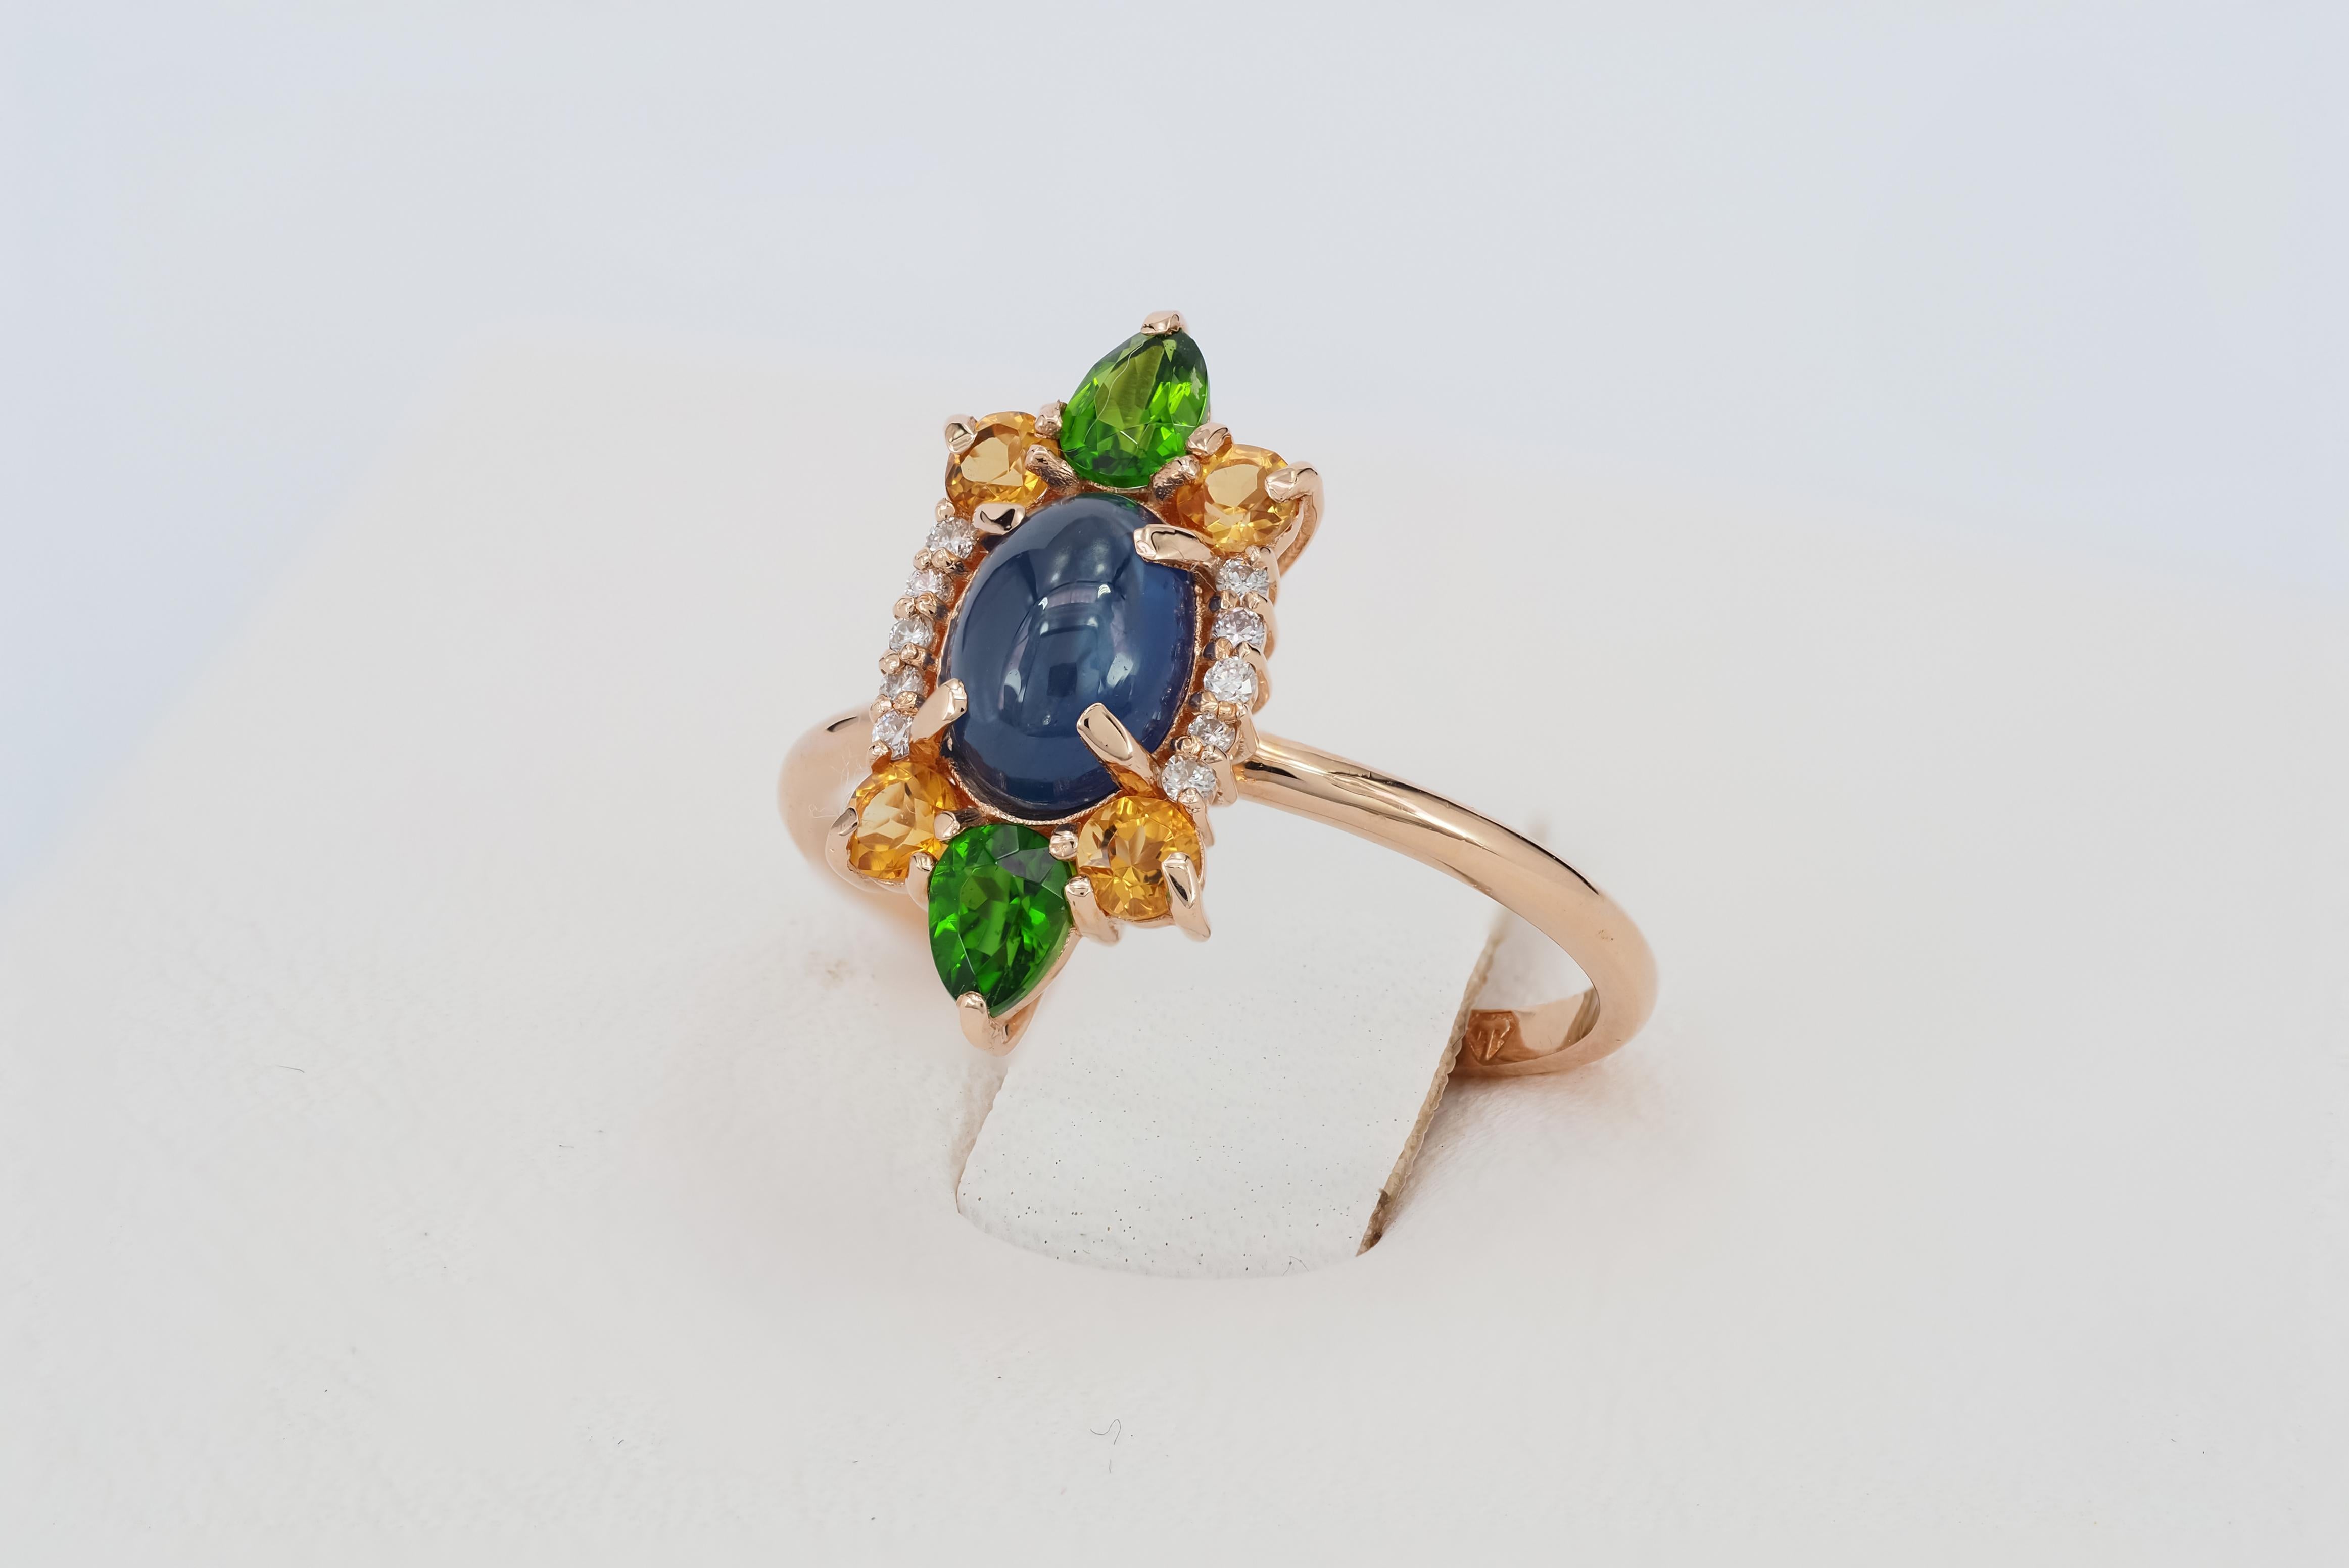 For Sale:  14k Gold Ring with Sapphire, Chrome Diopside and Diamonds 7